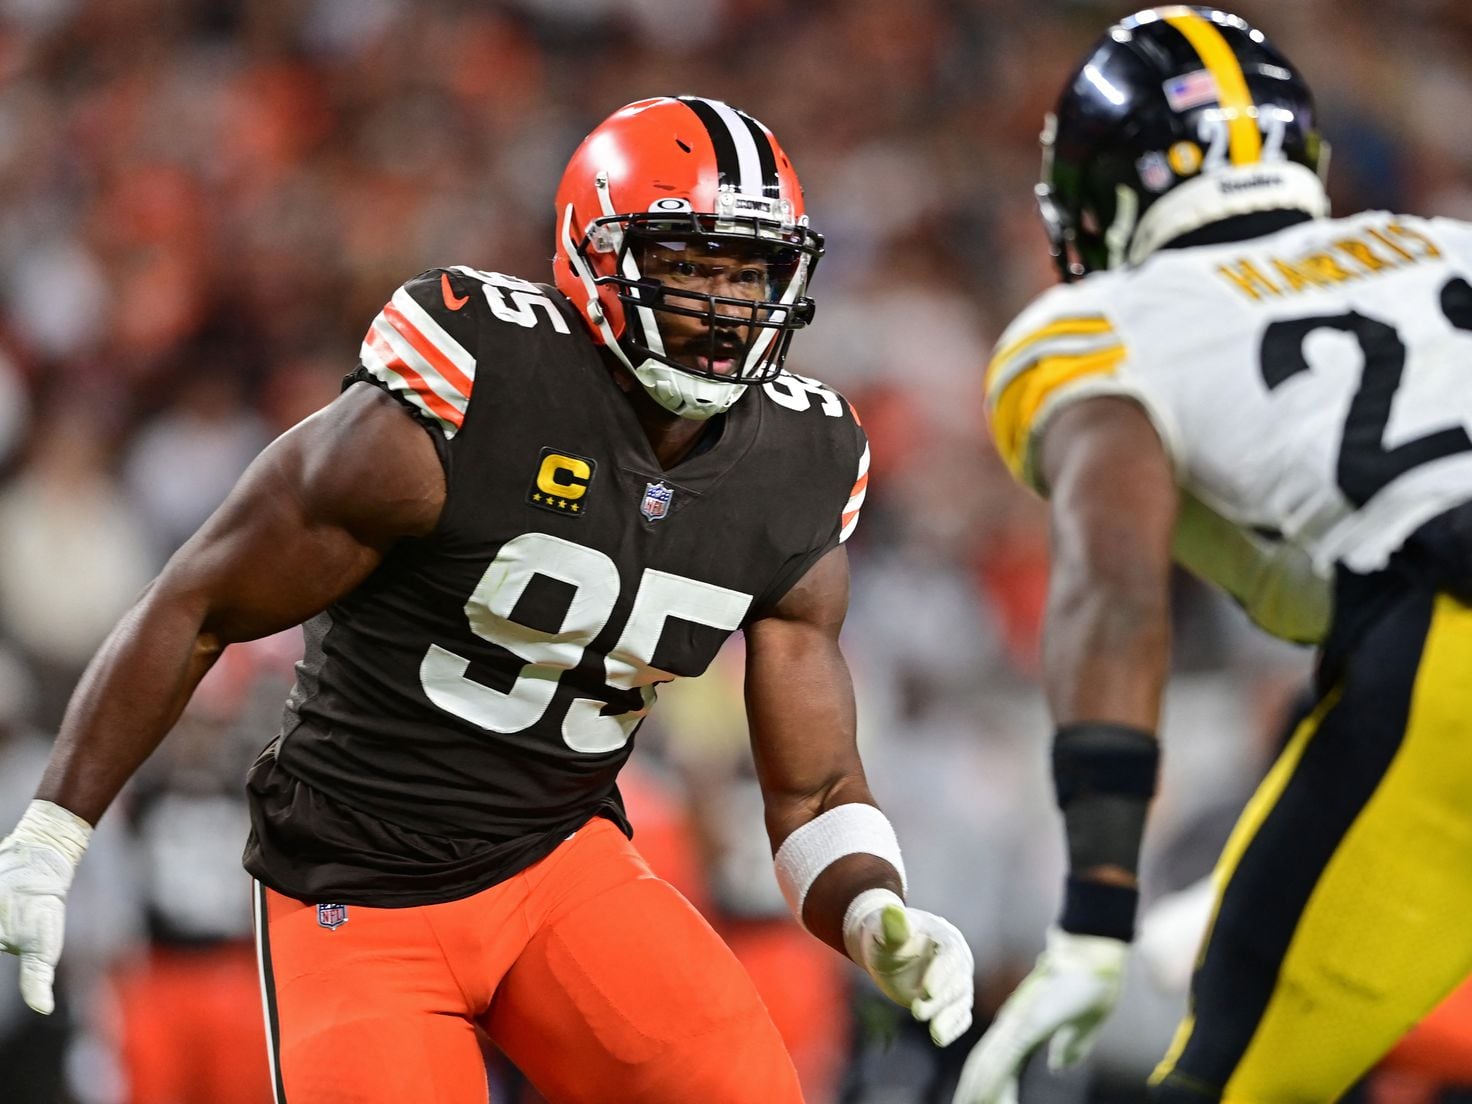 Browns vs Steelers odds and predictions: Who is the favorite in the